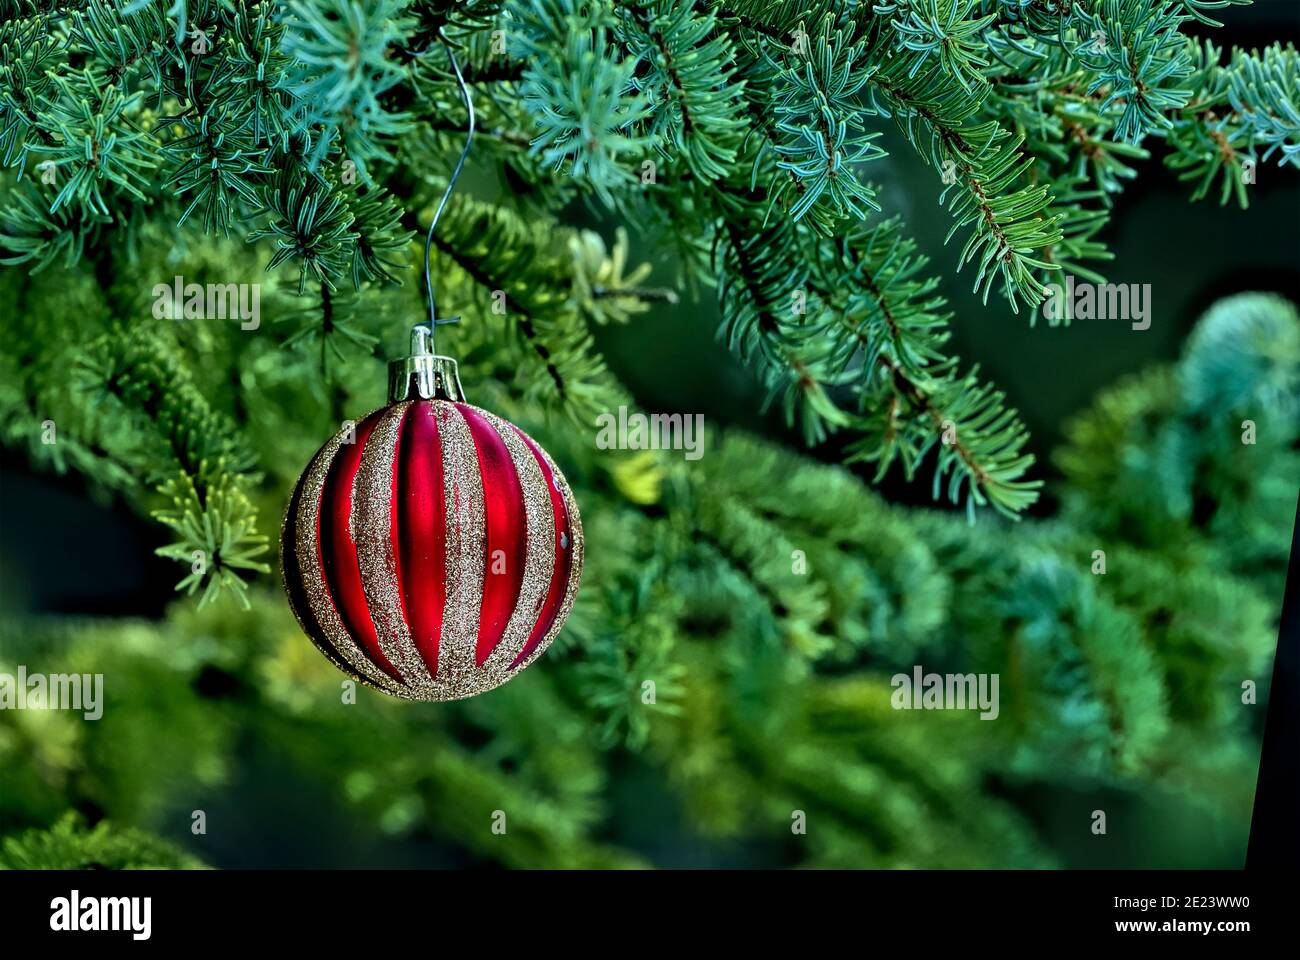 A red Christmas tree ornament that was placed on an evergreen tree on a hiking trail in rural Alberta Canada. Stock Photo